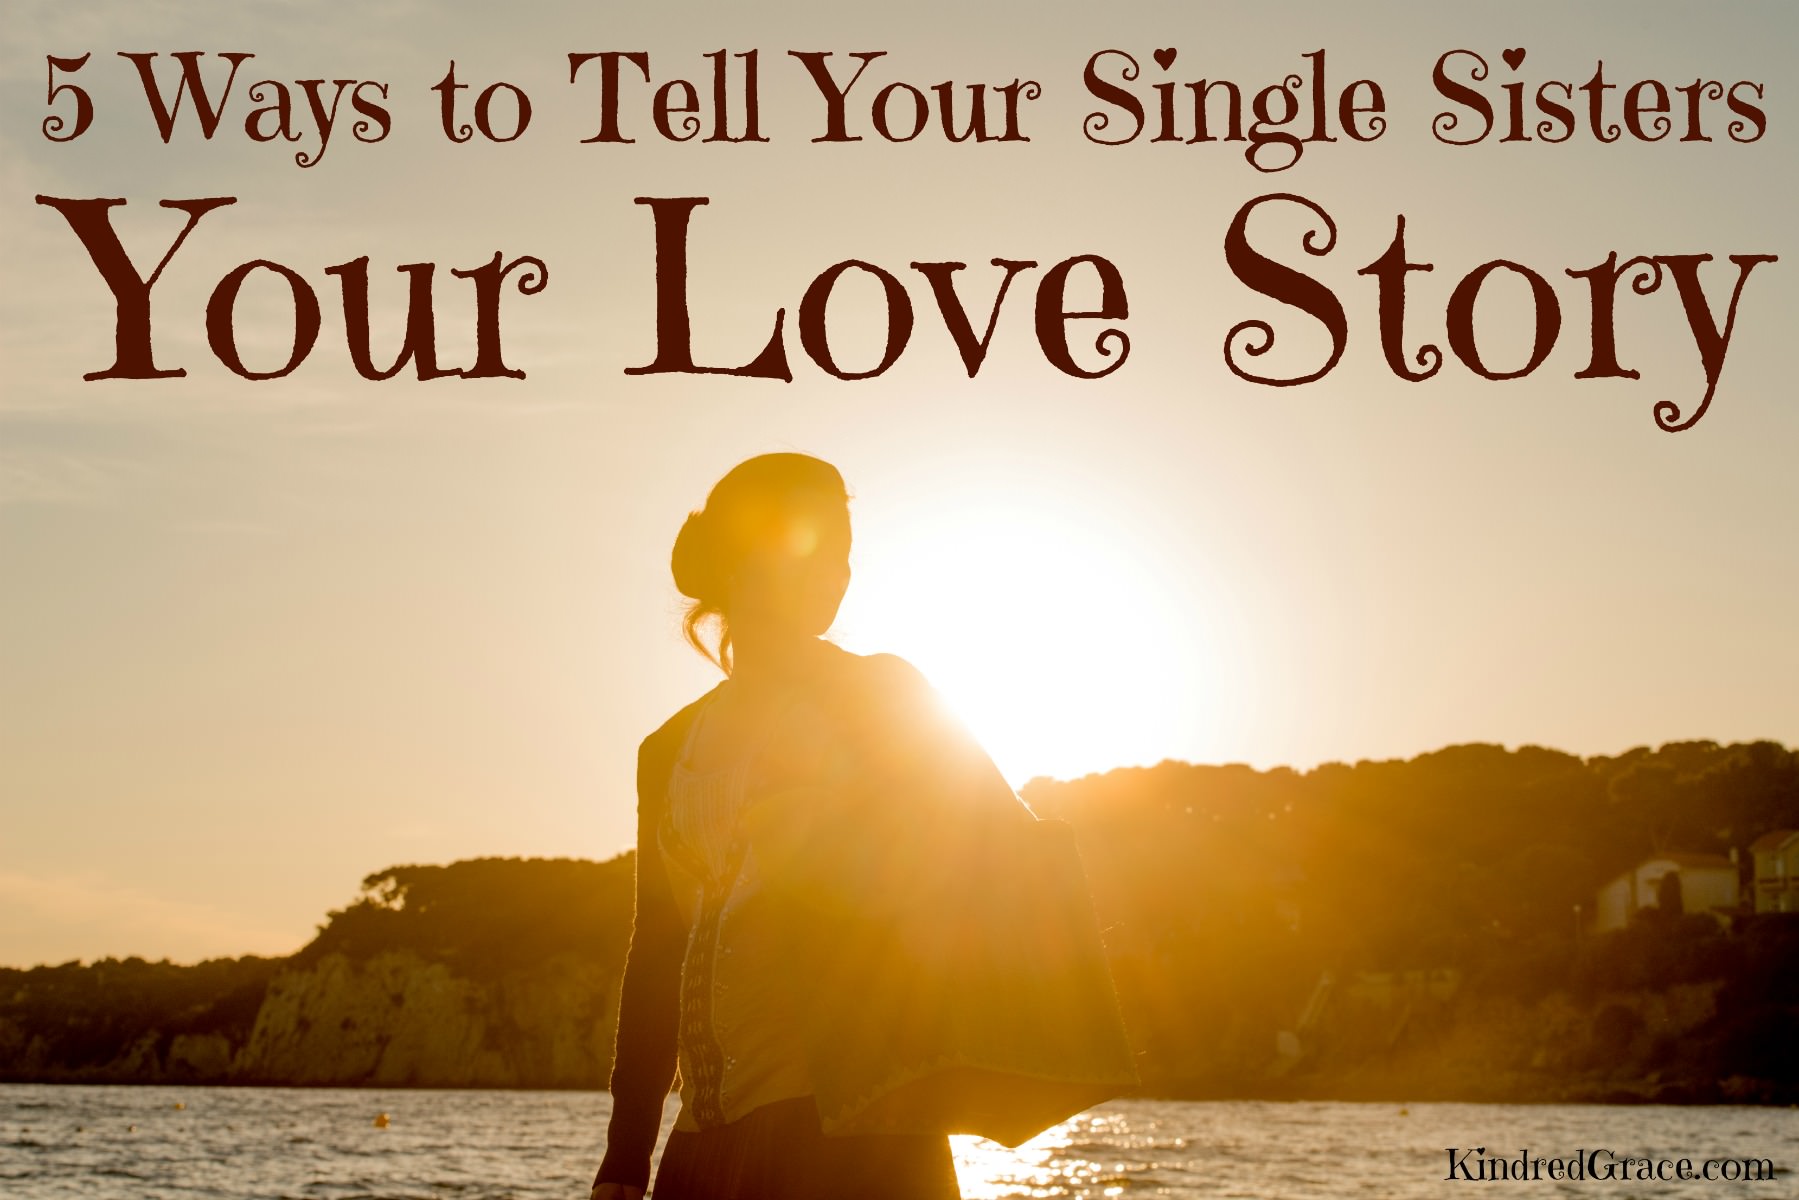 5 Ways to Tell Your Single Sisters Your Love Story